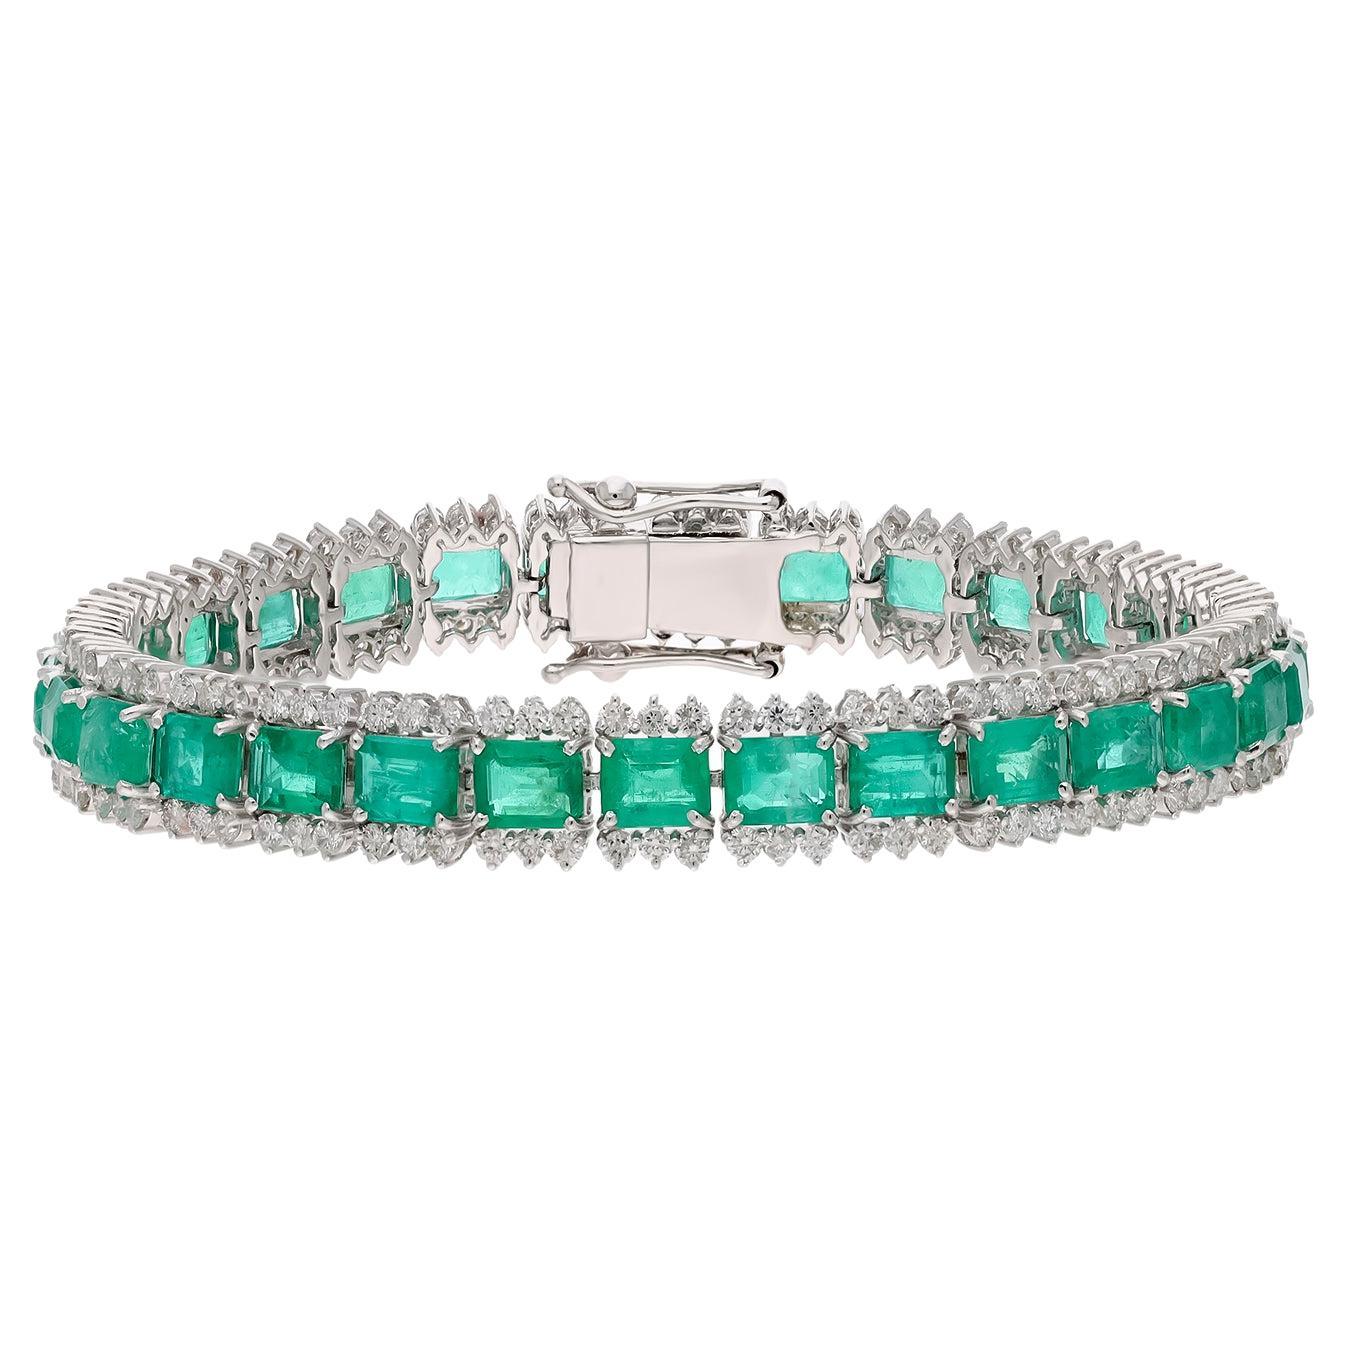 Natural zambian emerald bracelet with diamond 3.25 cts in 18k gold